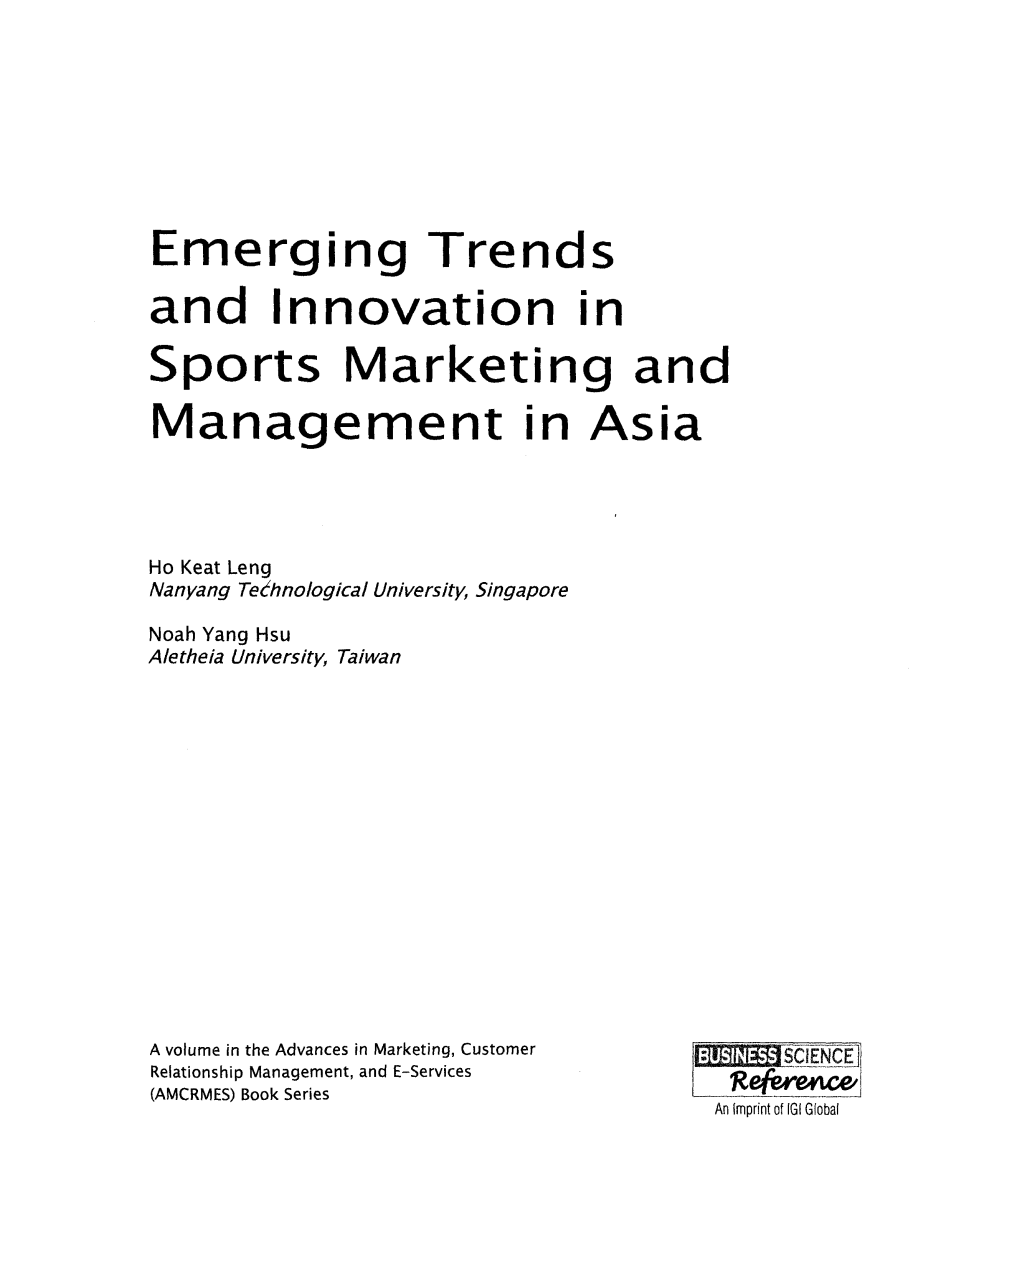 Emerging Trends and Innovation in Sports Marketing and Management